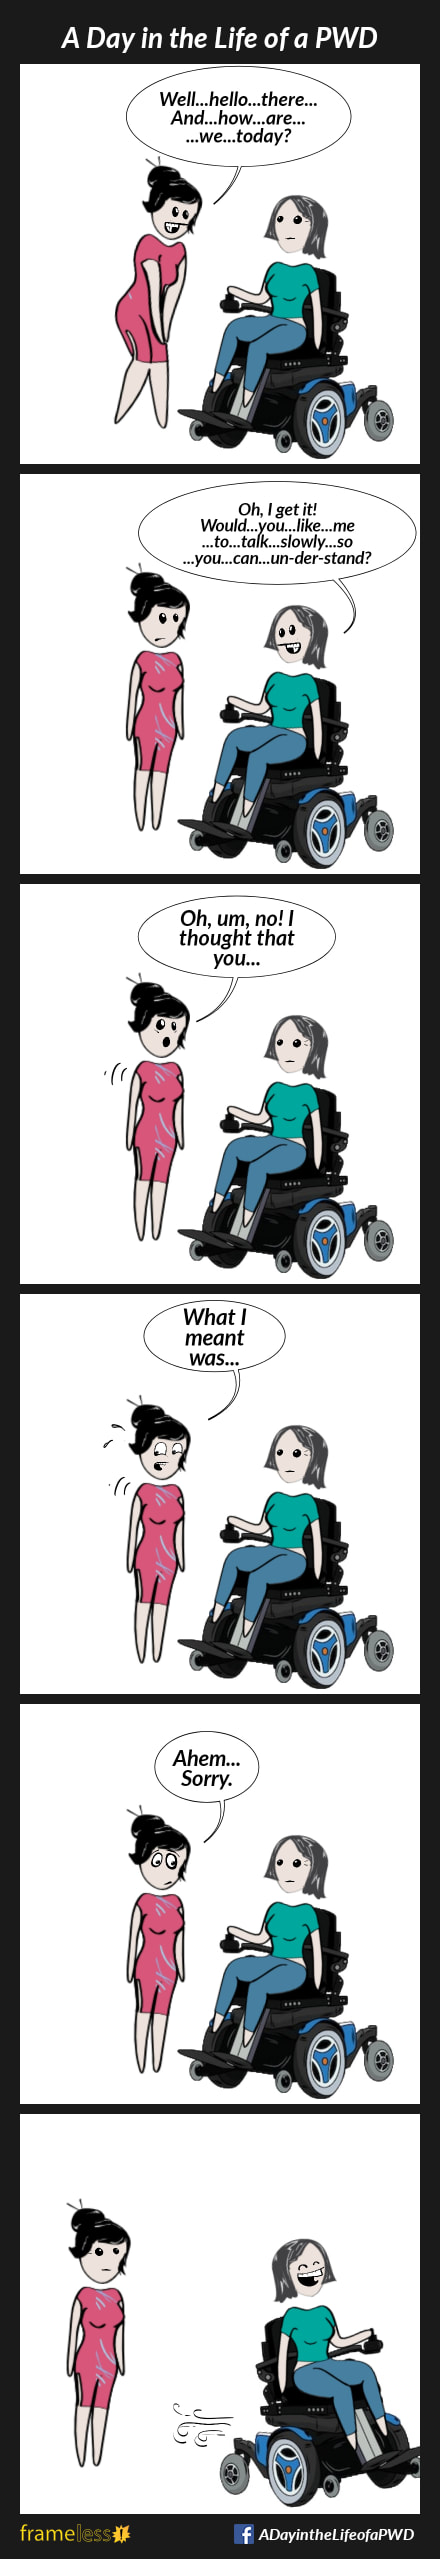 Frame 1:
A woman in a power wheelchair is approached by a stranger.
STRANGER:Well...hello...there...
...And...how...are...we...today?

Frame 2:
WOMAN: Oh, I get it! Would...you...like 
...me...to...talk...slowly...so...you...can
...un-der-stand?

Frame 3:
STRANGER (surprised): Oh, um, no! I thought that you...
Woman stares at her.

Frame 4:
STRANGER (getting nervous): What I meant was...
Woman continues to stare.

Frame 5:
STRANGER (embarrassed): Ahem...
...Sorry.

Frame 6:
Woman rides away, laughing to herself.